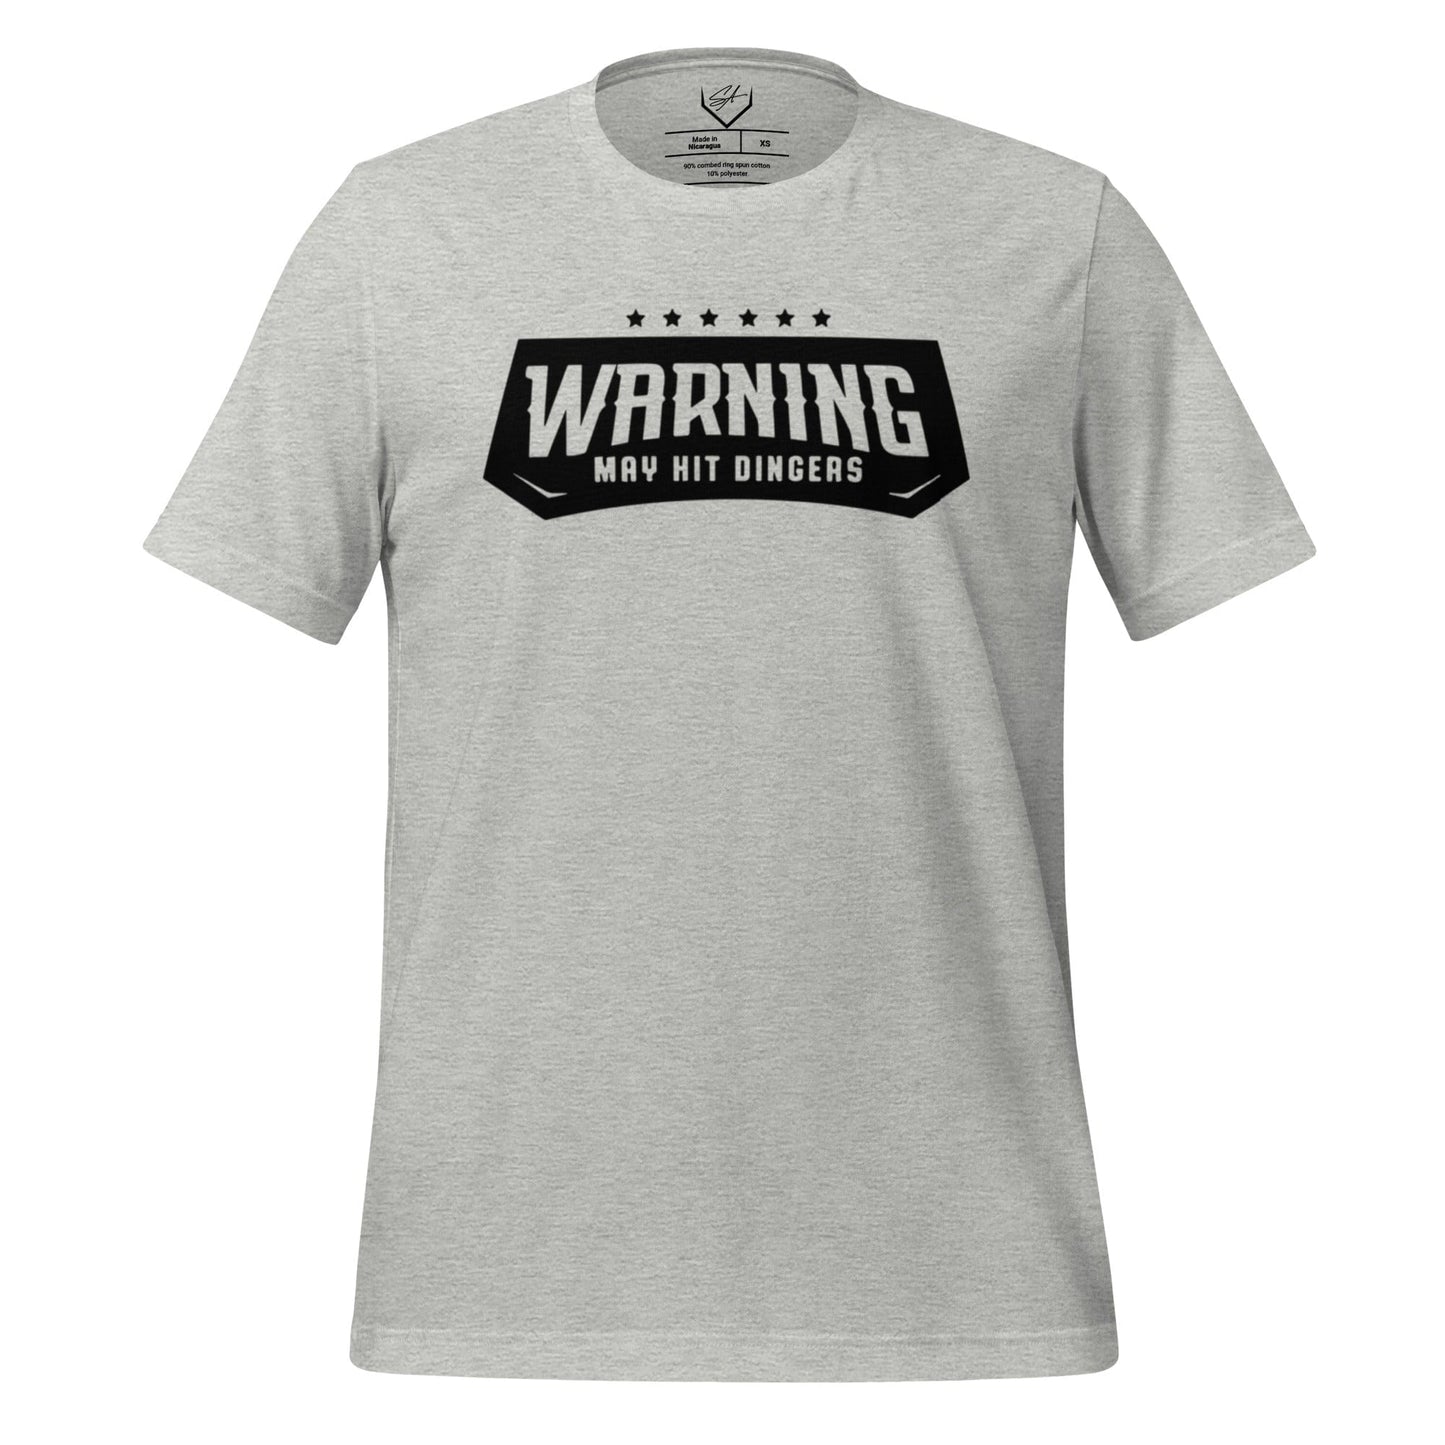 Warning May Hit Dingers - Adult Tee